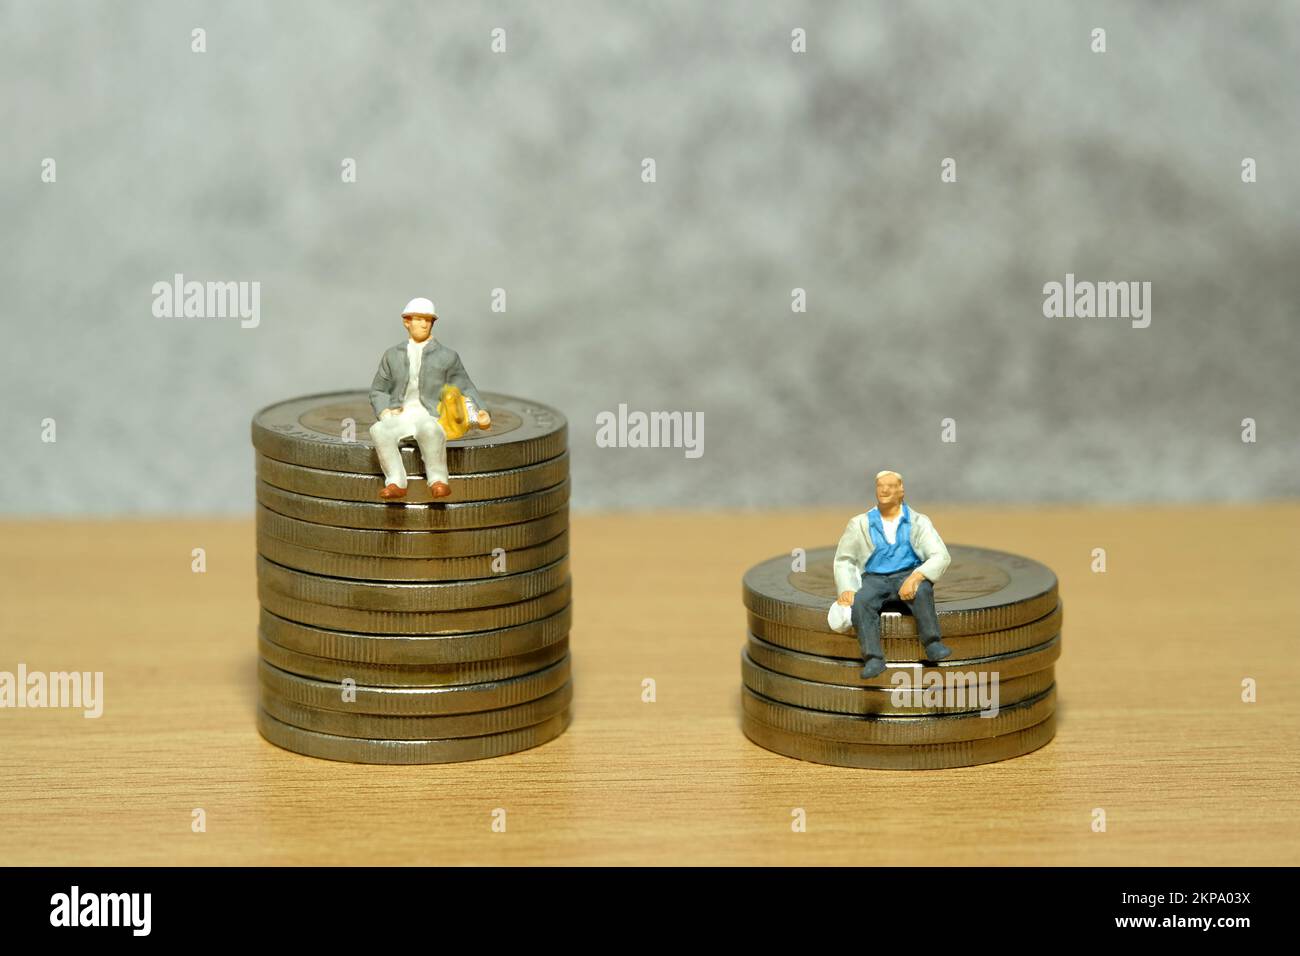 Miniature people toy figure photography. Income and wealth gap, inequality. Two people with different jobs sitting above coin pile. Image photo Stock Photo